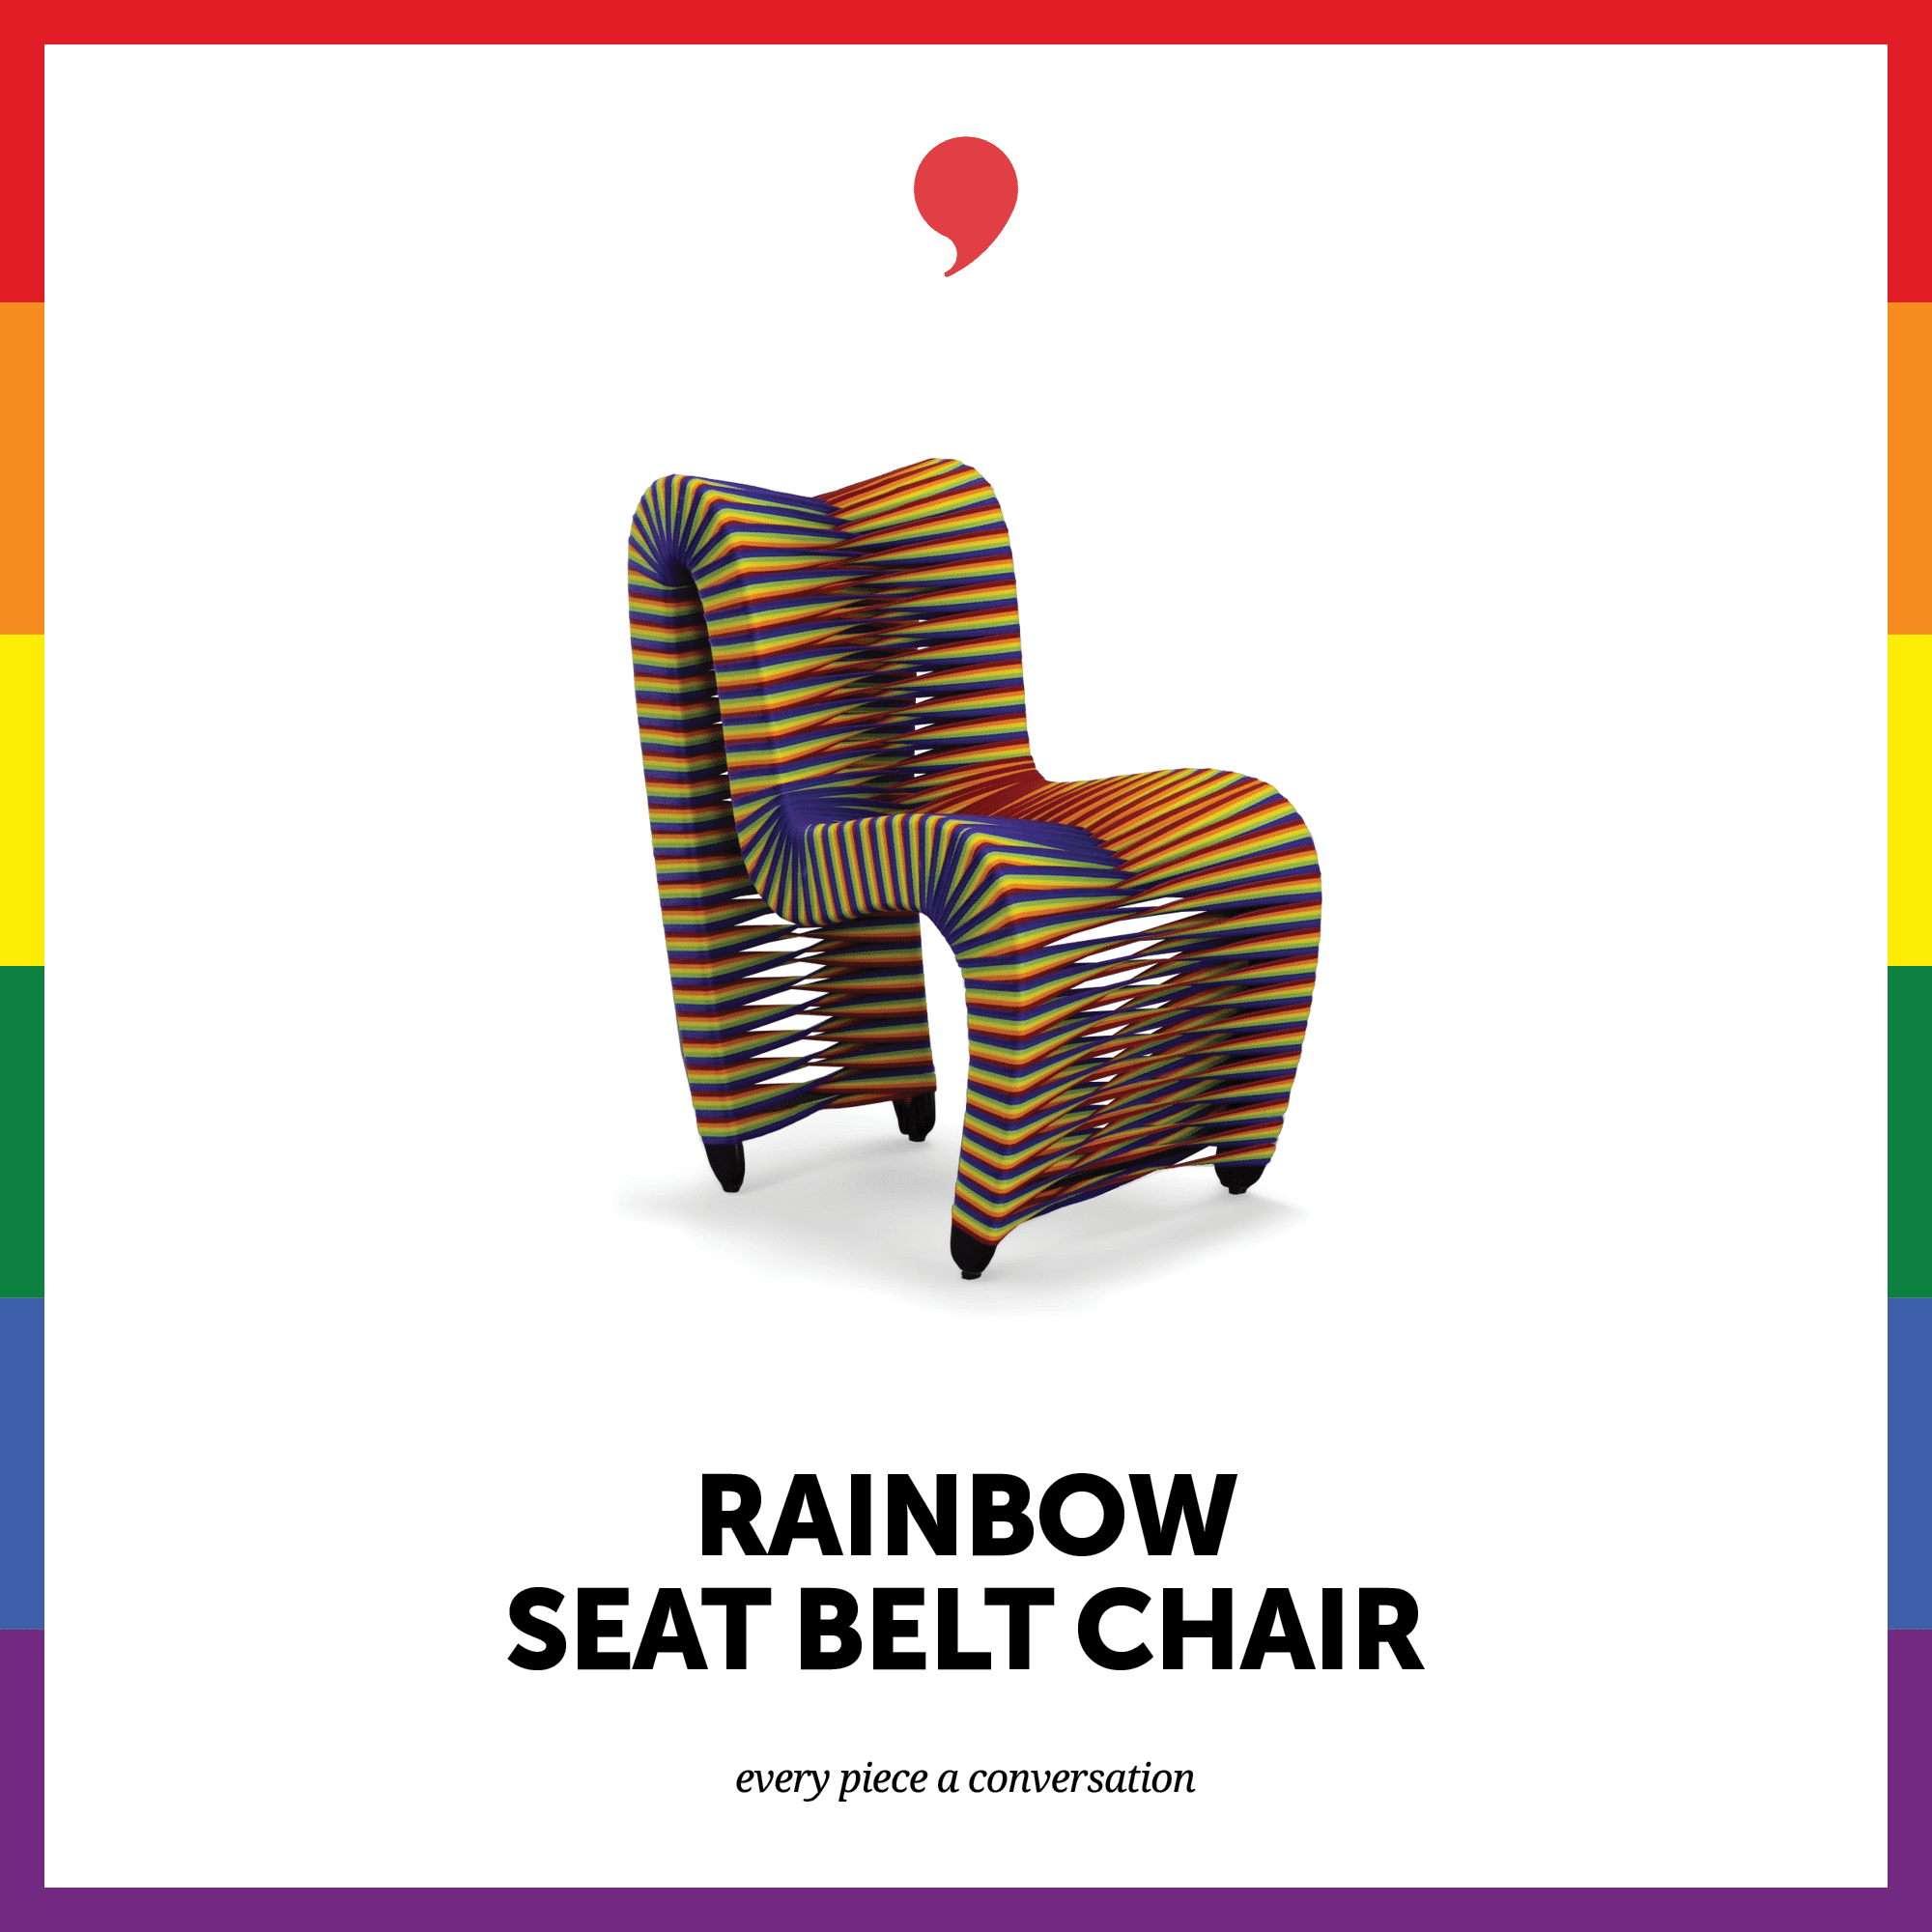 Phillips Collection Launches Rainbow Seat Belt Chair To Honor Equality and Diversity